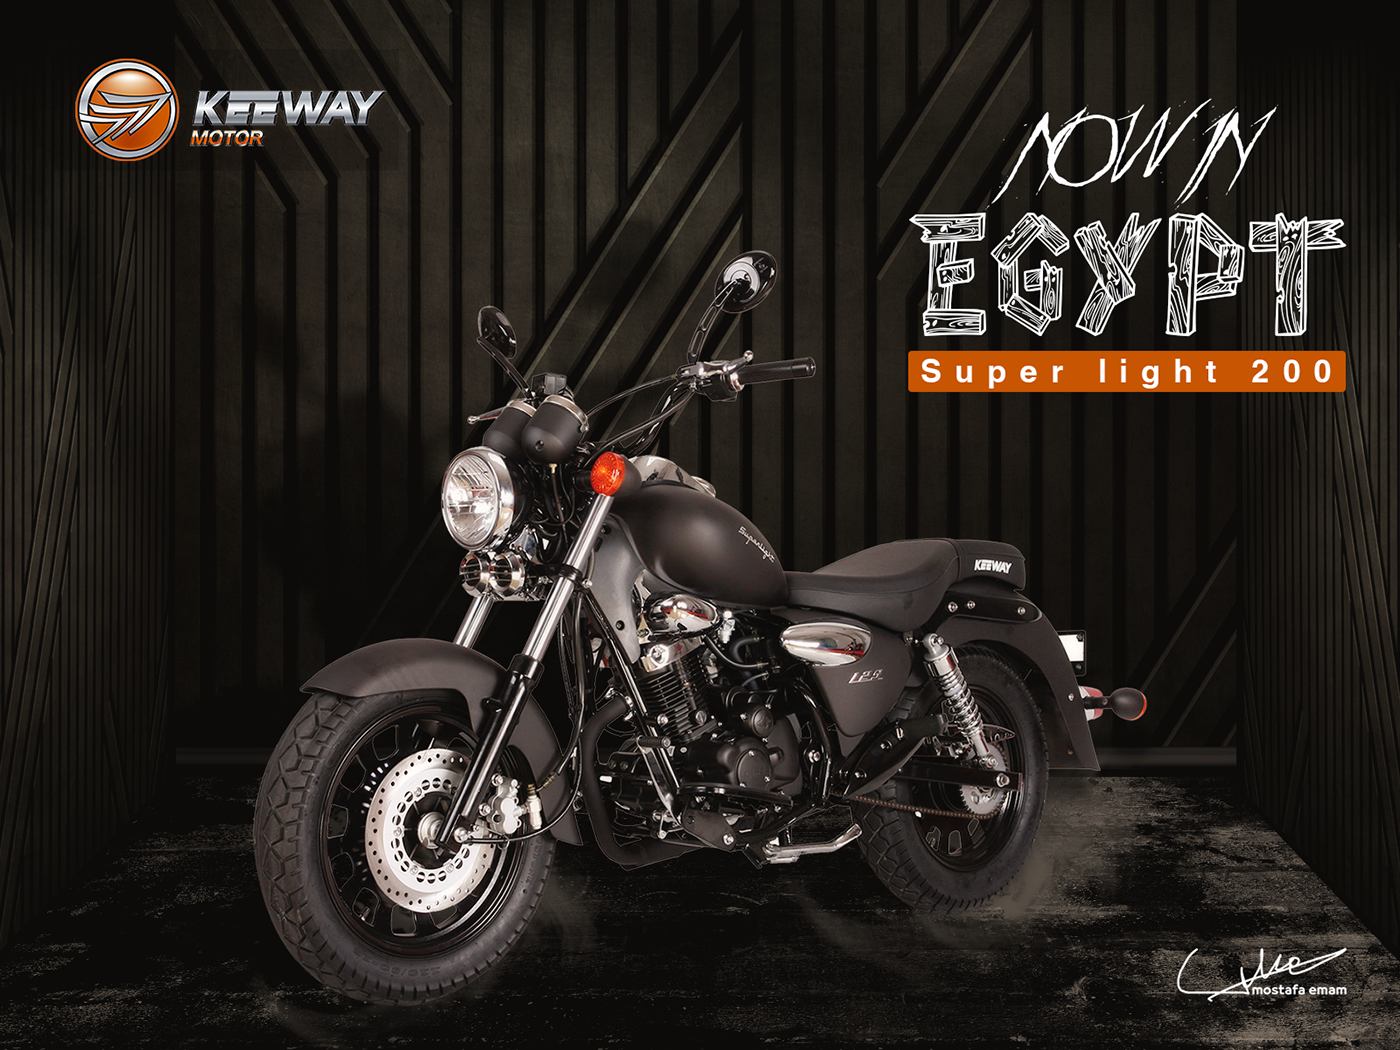 ADV graphic BMW KEEWAY motorbike egypt germany promoted car party